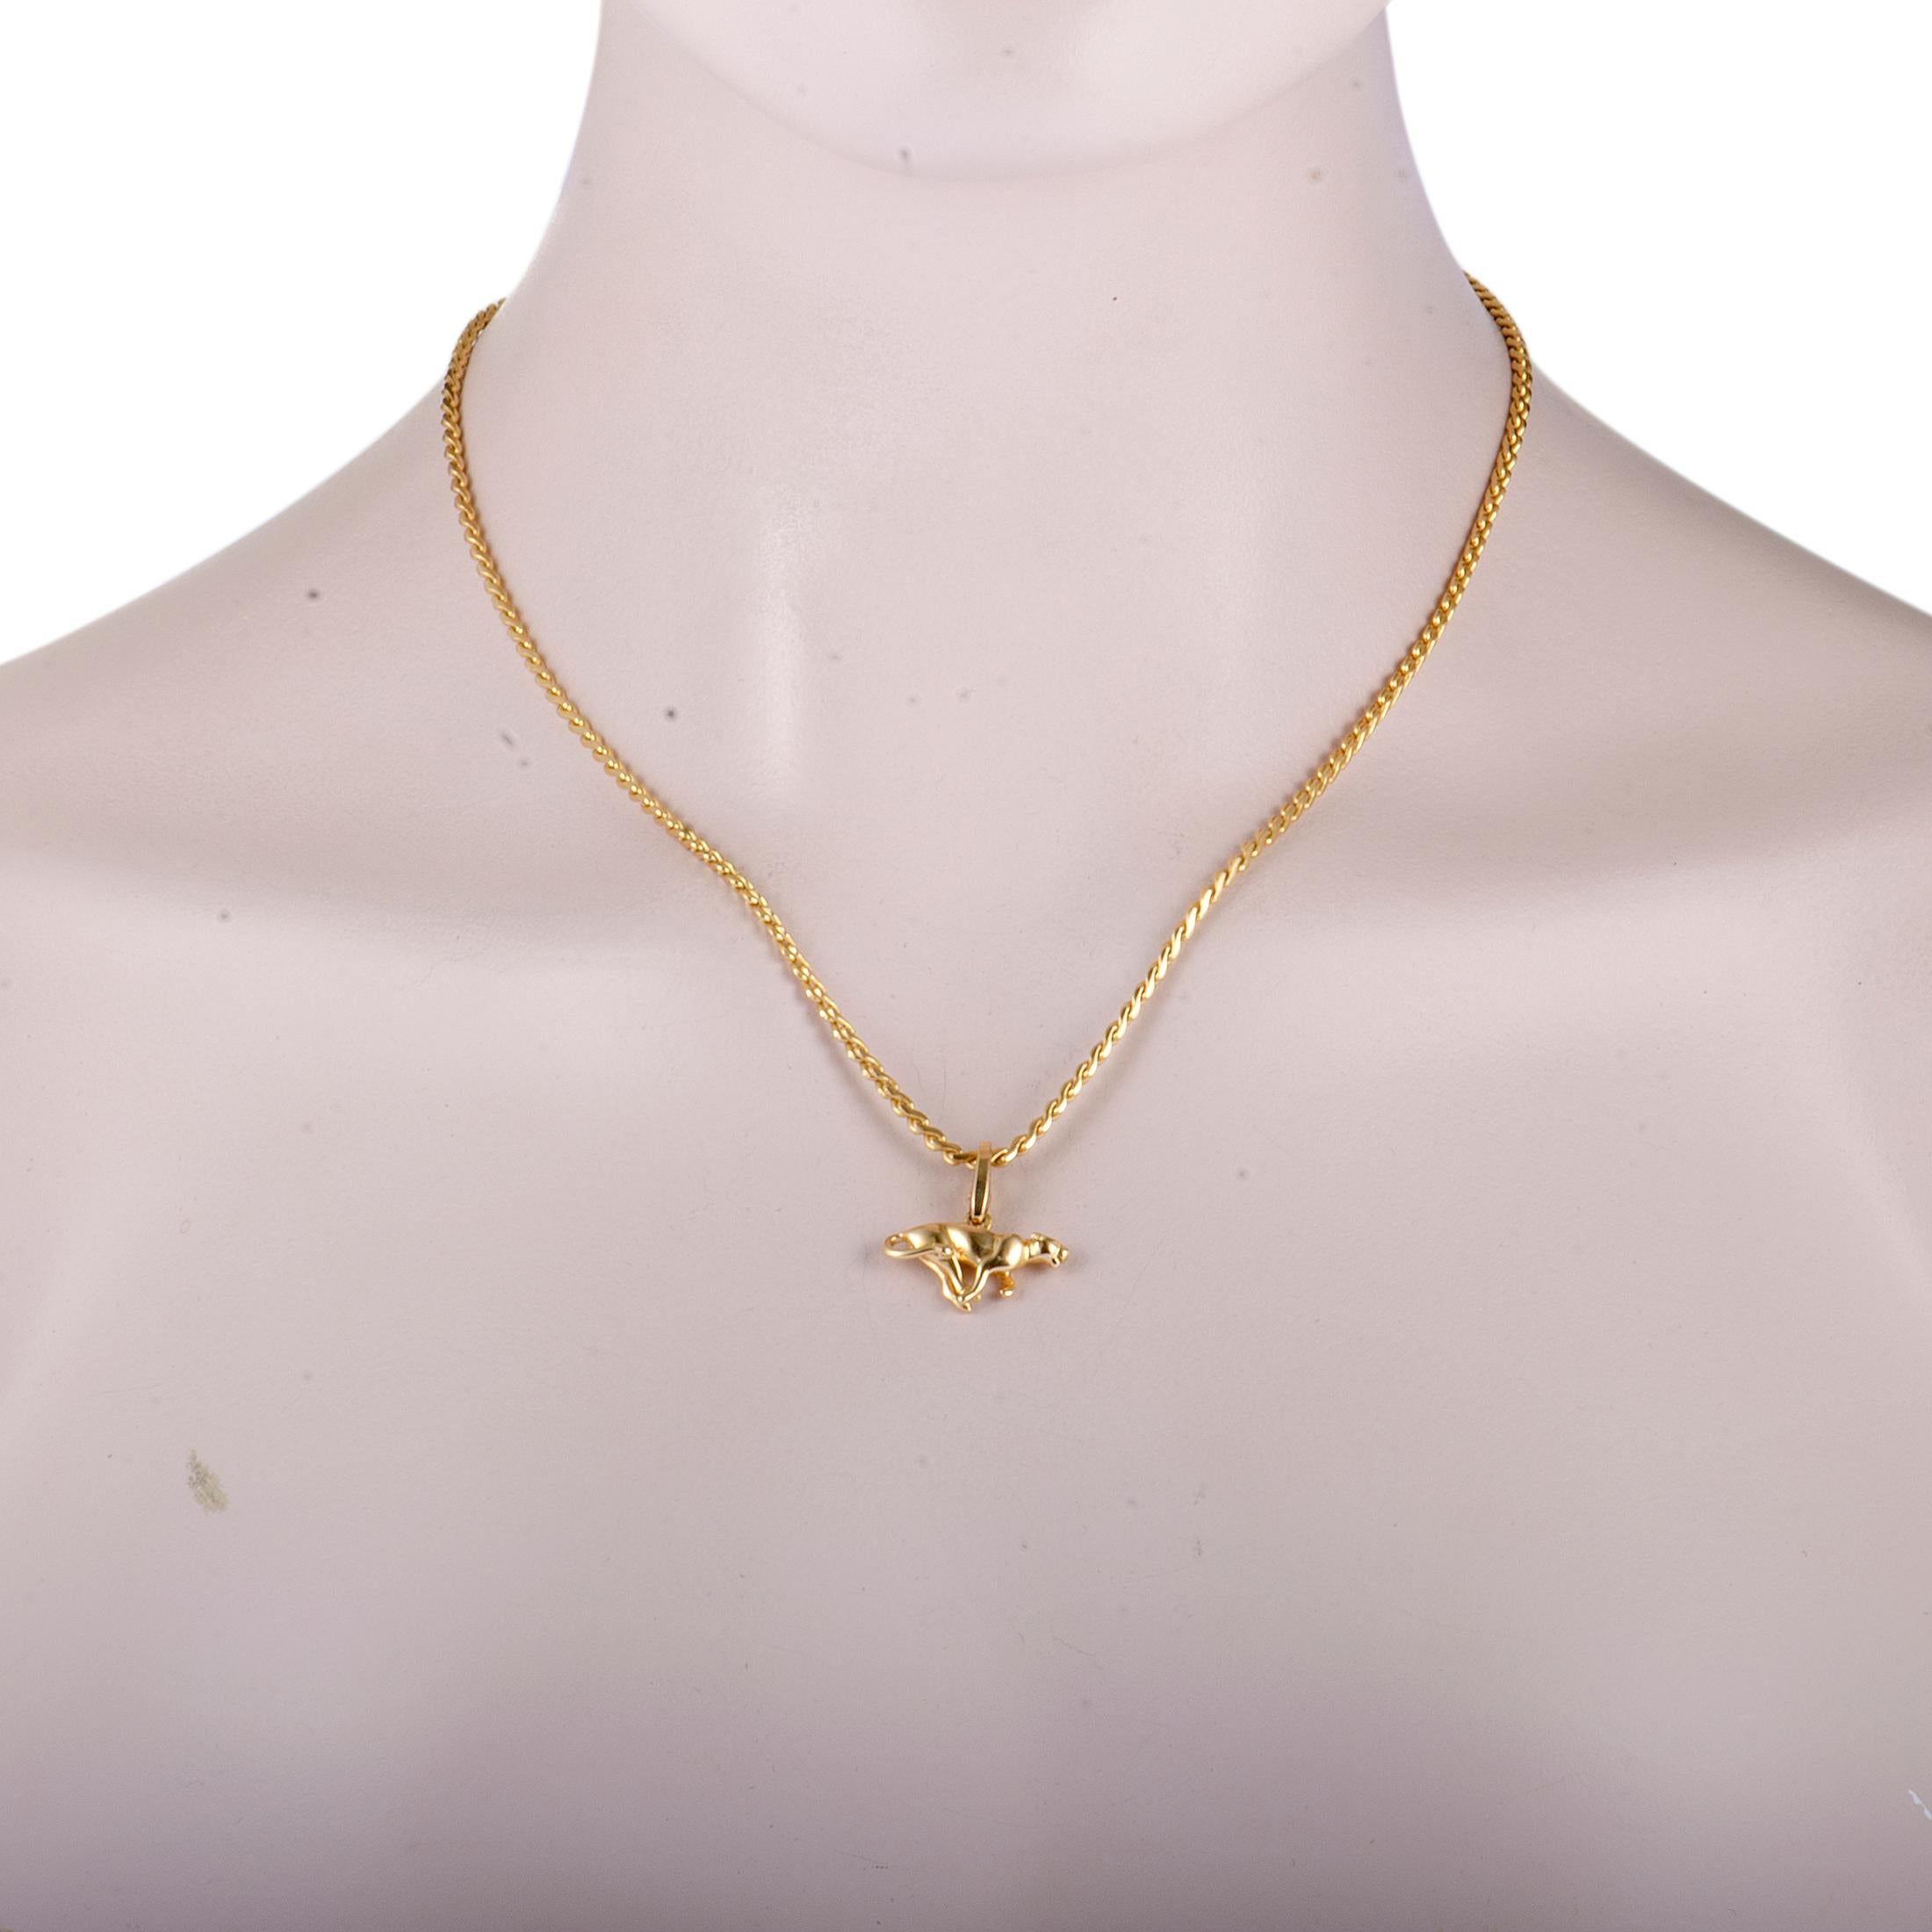 This attractive vintage necklace is part of the iconic “Panthère” collection by Cartier and features a beautifully designed chain onto which an eye-catching panther pendant is attached. The necklace is masterfully crafted from luxurious 18K yellow